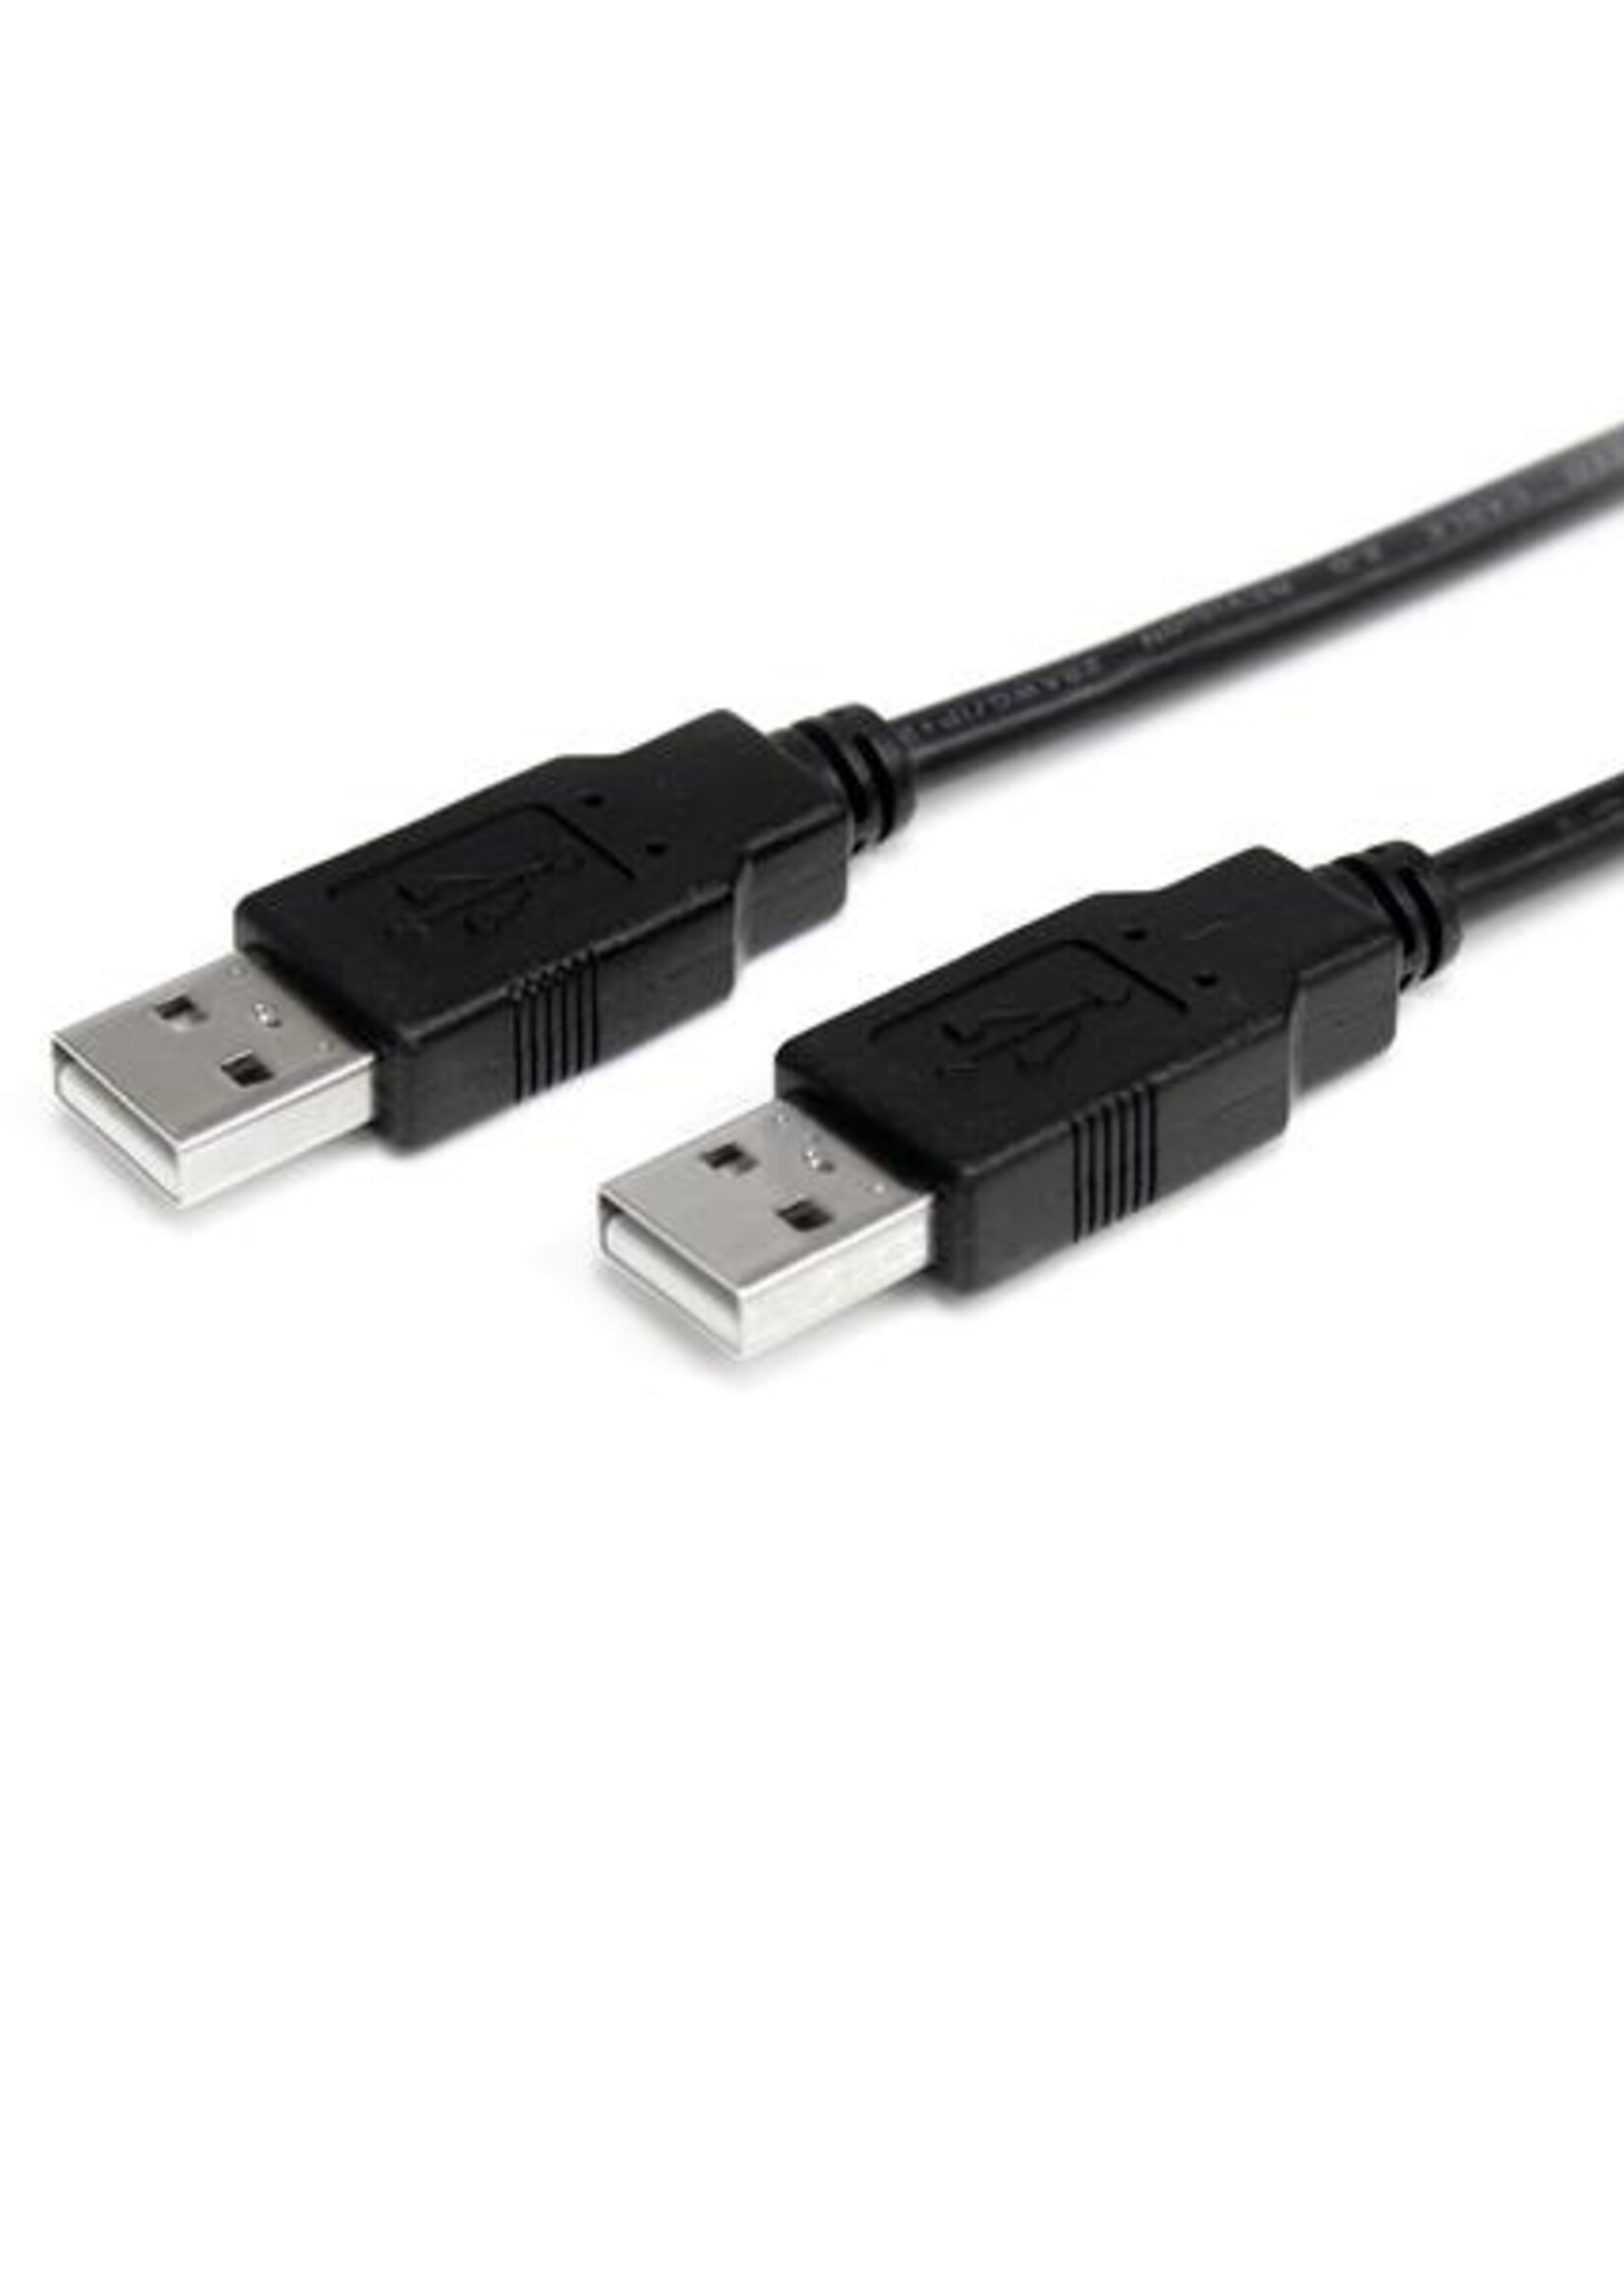 2m USB 2.0 A to A Cable - M/M